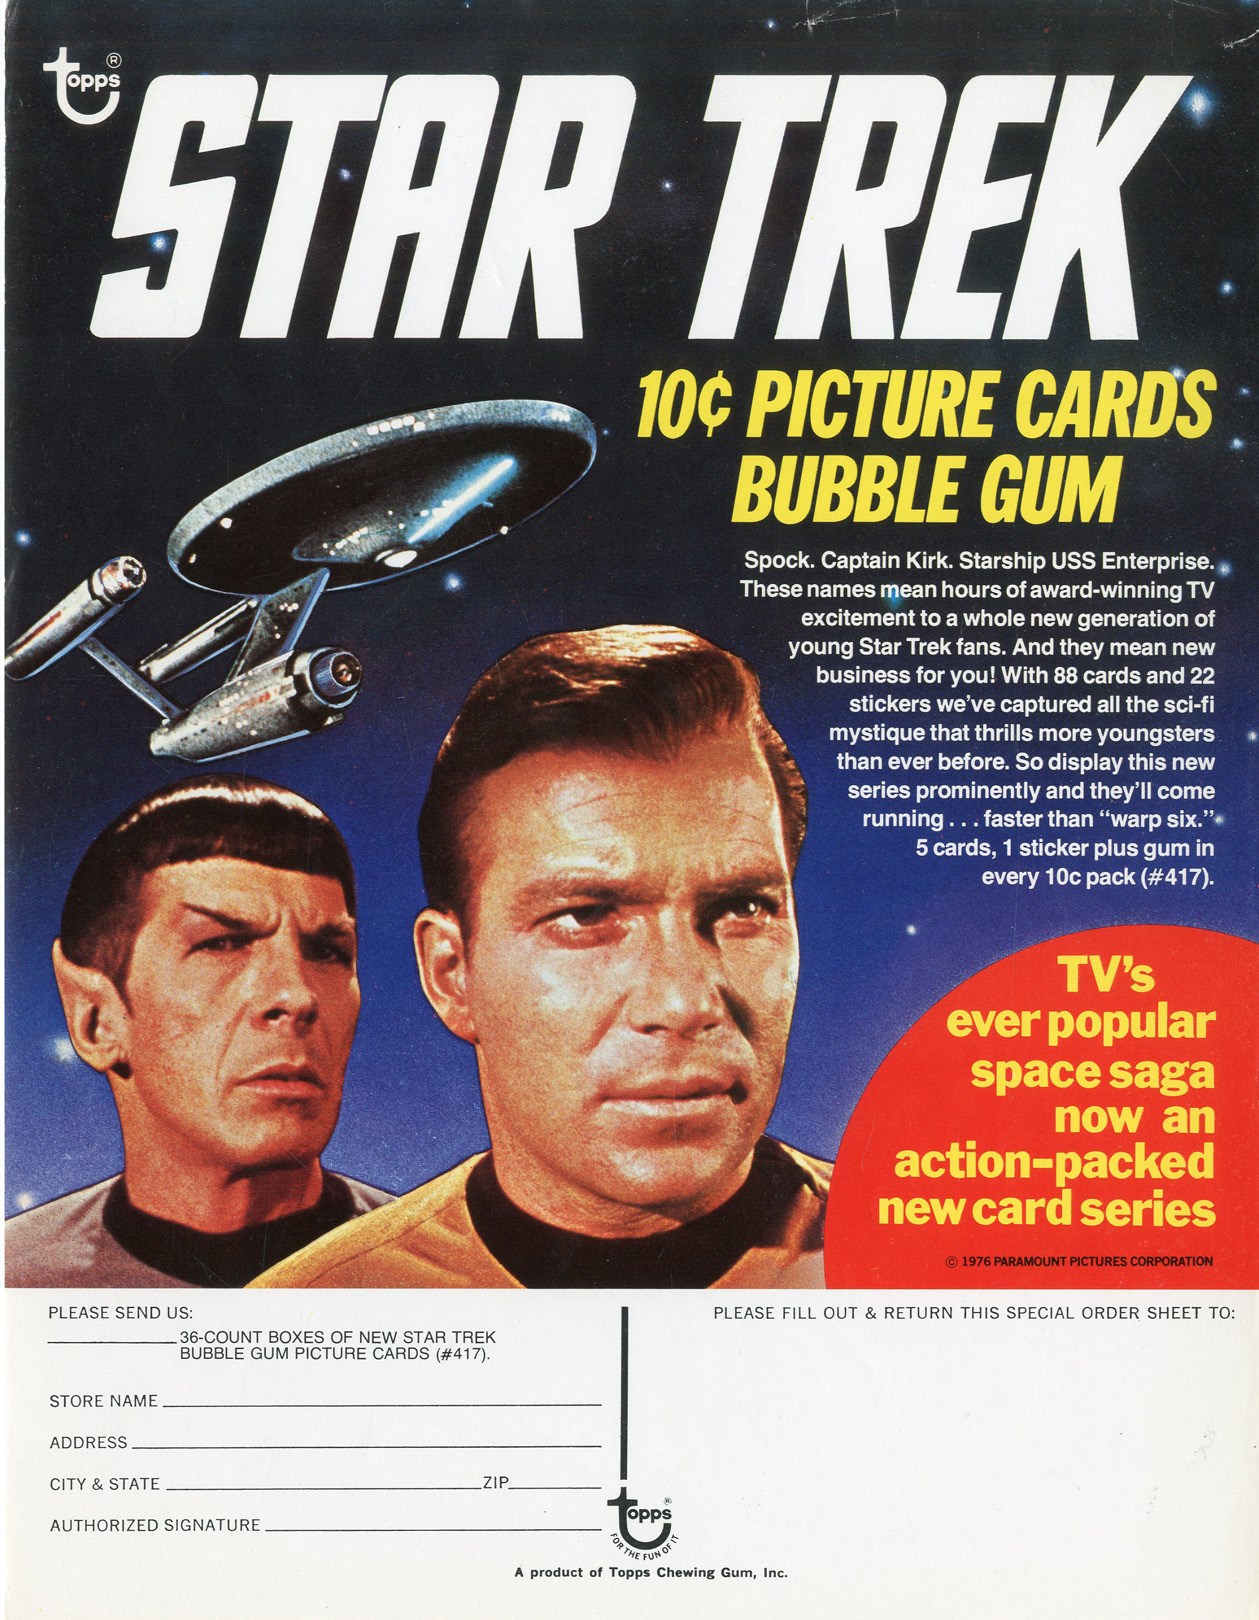 Baseball and Trading Cards - 1976 Topps Star Trek Cardboard Ordering Form with Captain Kirk and Spock - Only One Known!